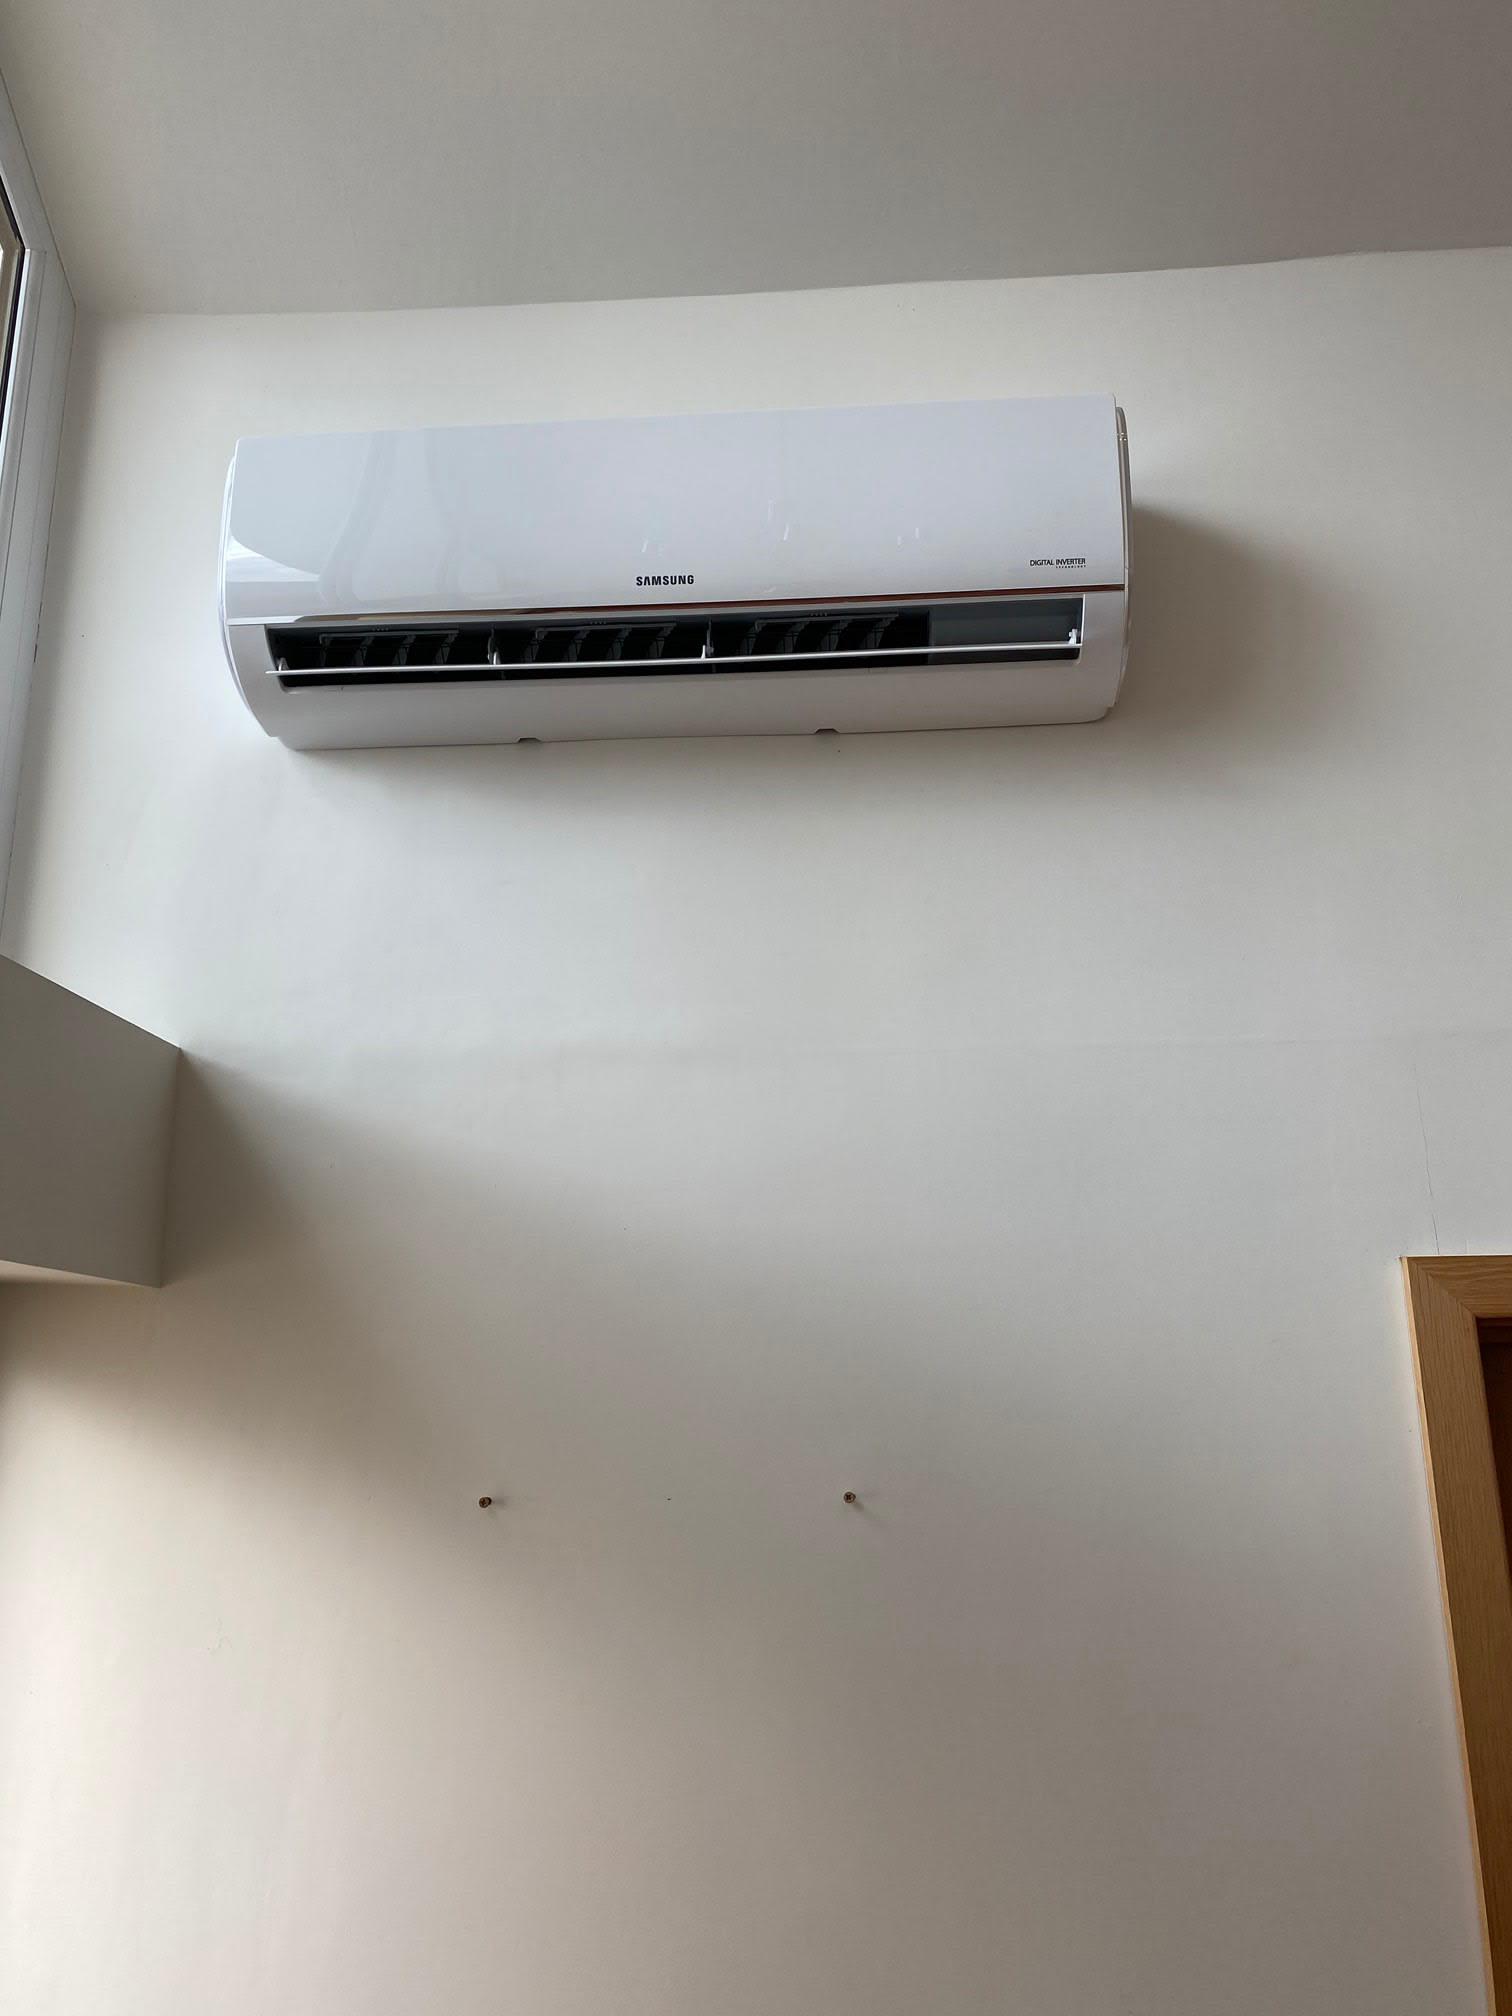 Images ML Air Conditioning